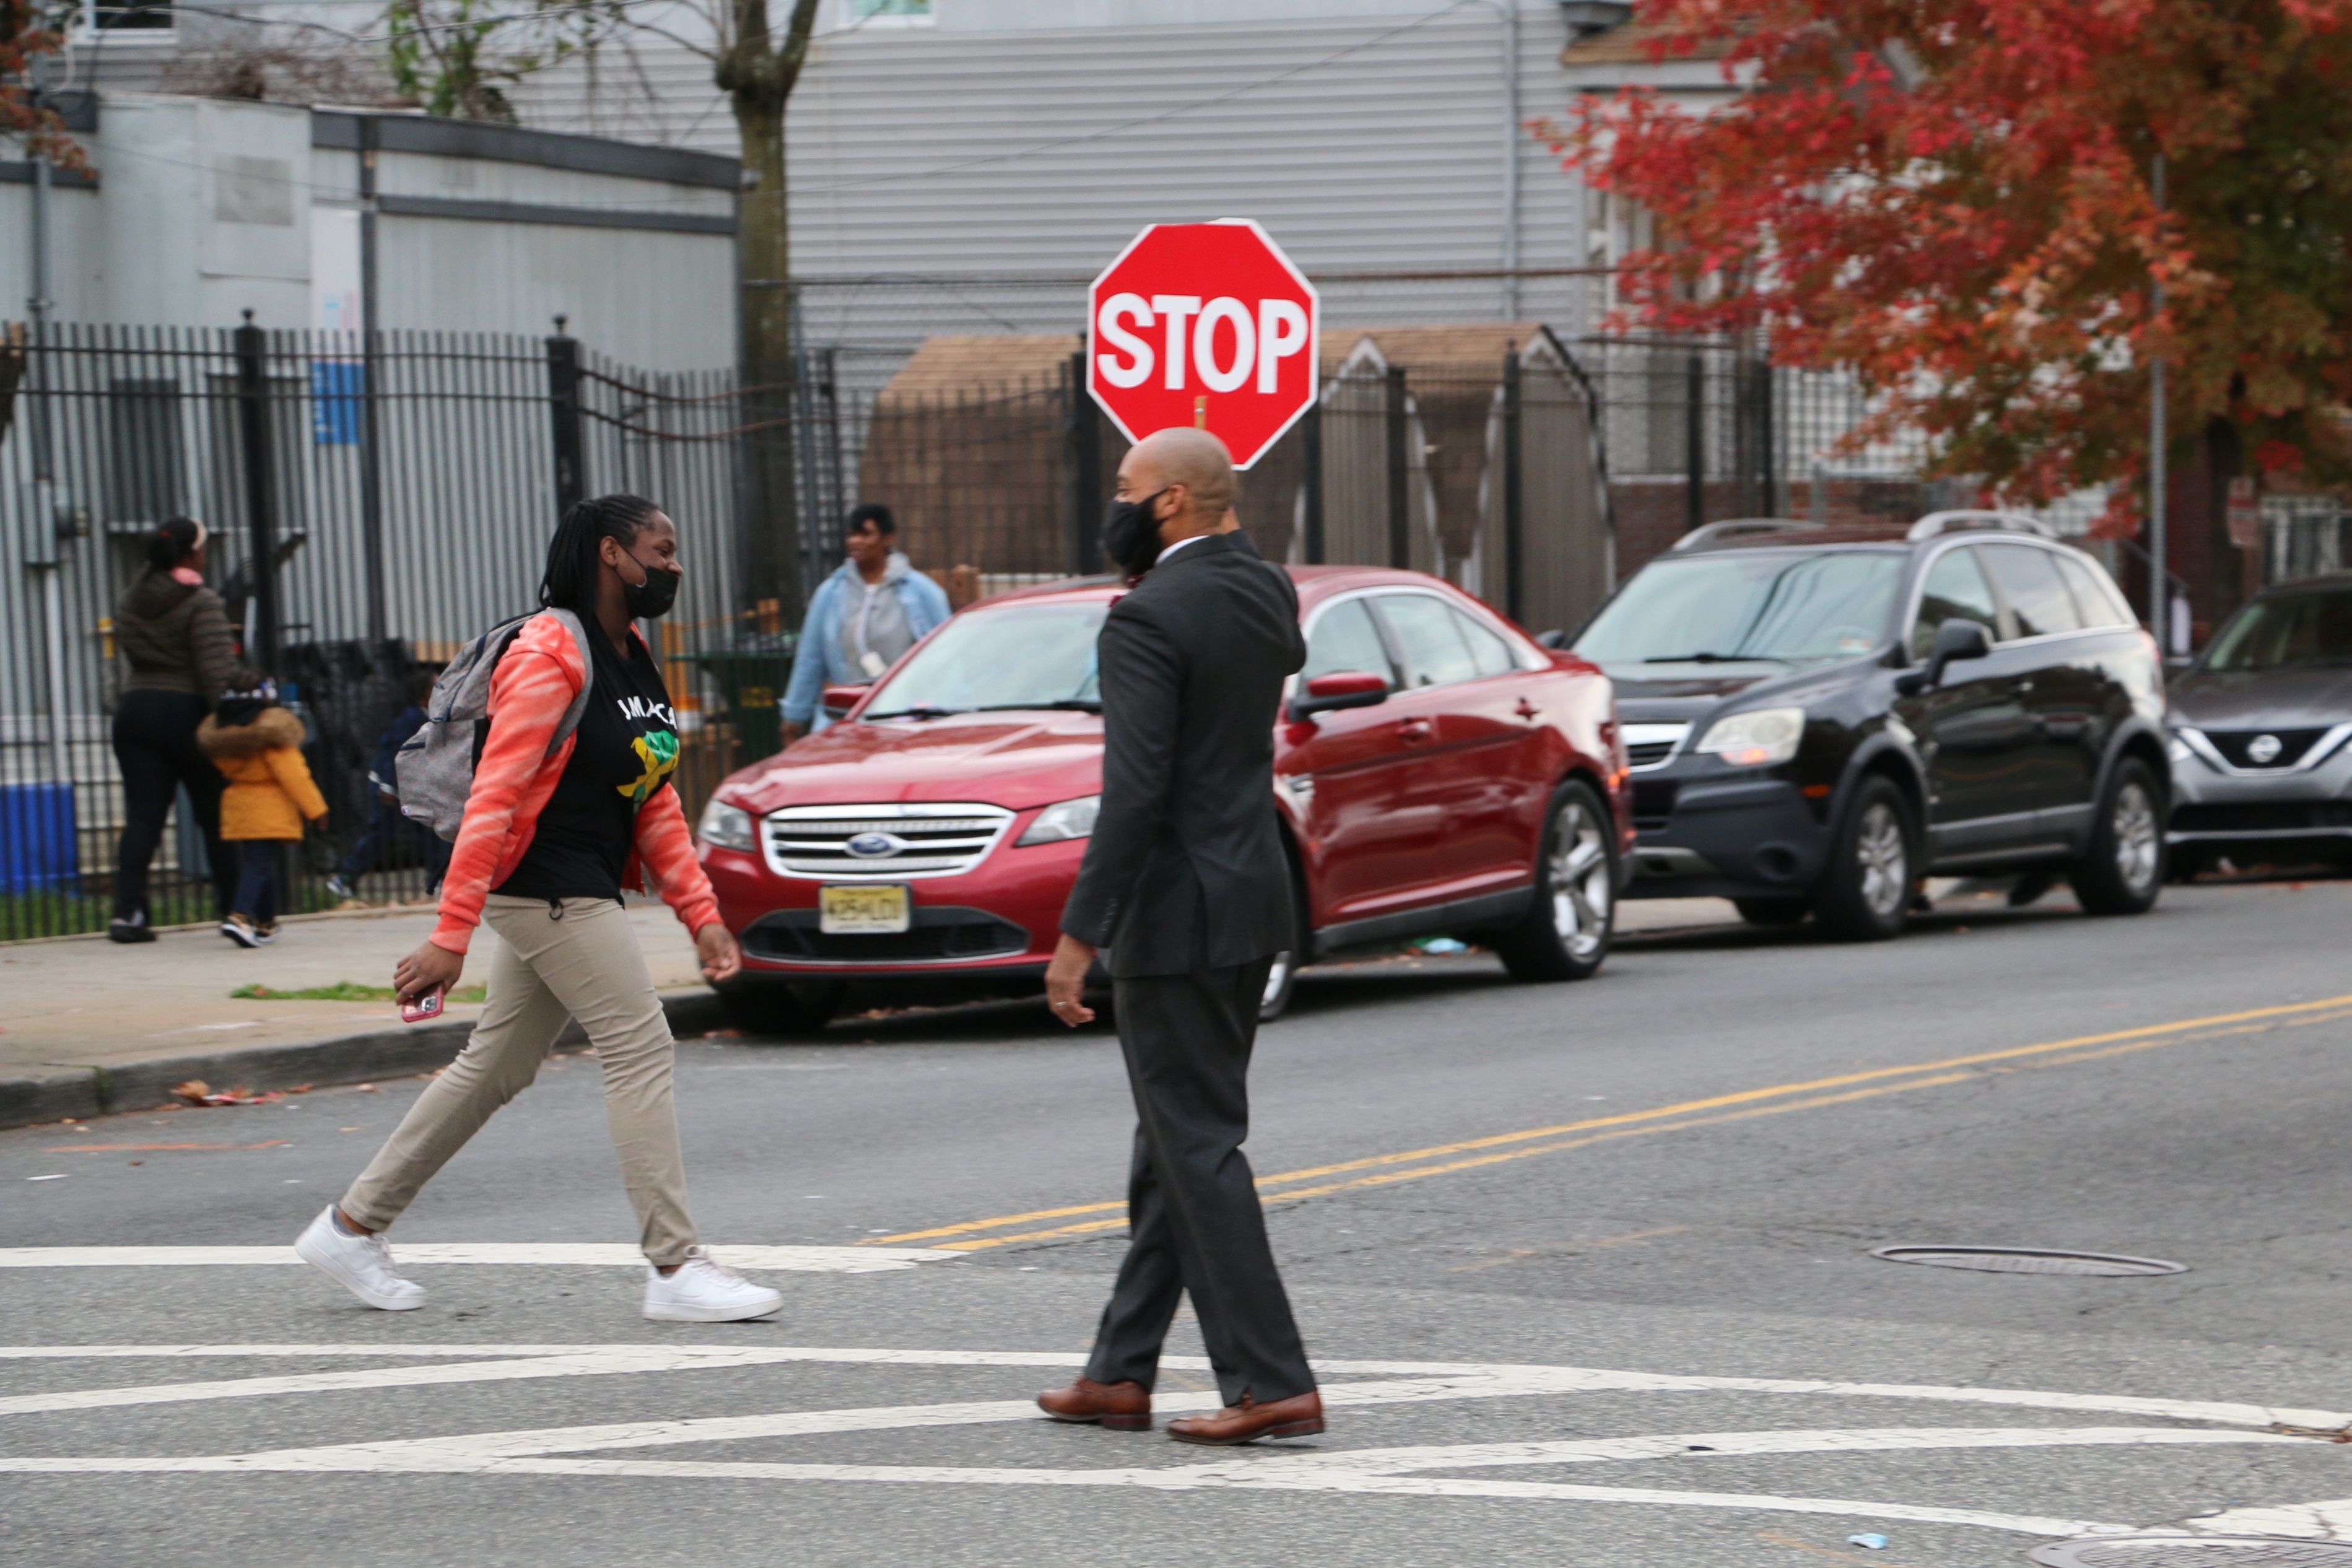 H. Grady James, IV, principal of Hawthorne Avenue School in Newark, stands in a crosswalk and holds a red stop sign as he directs traffic.